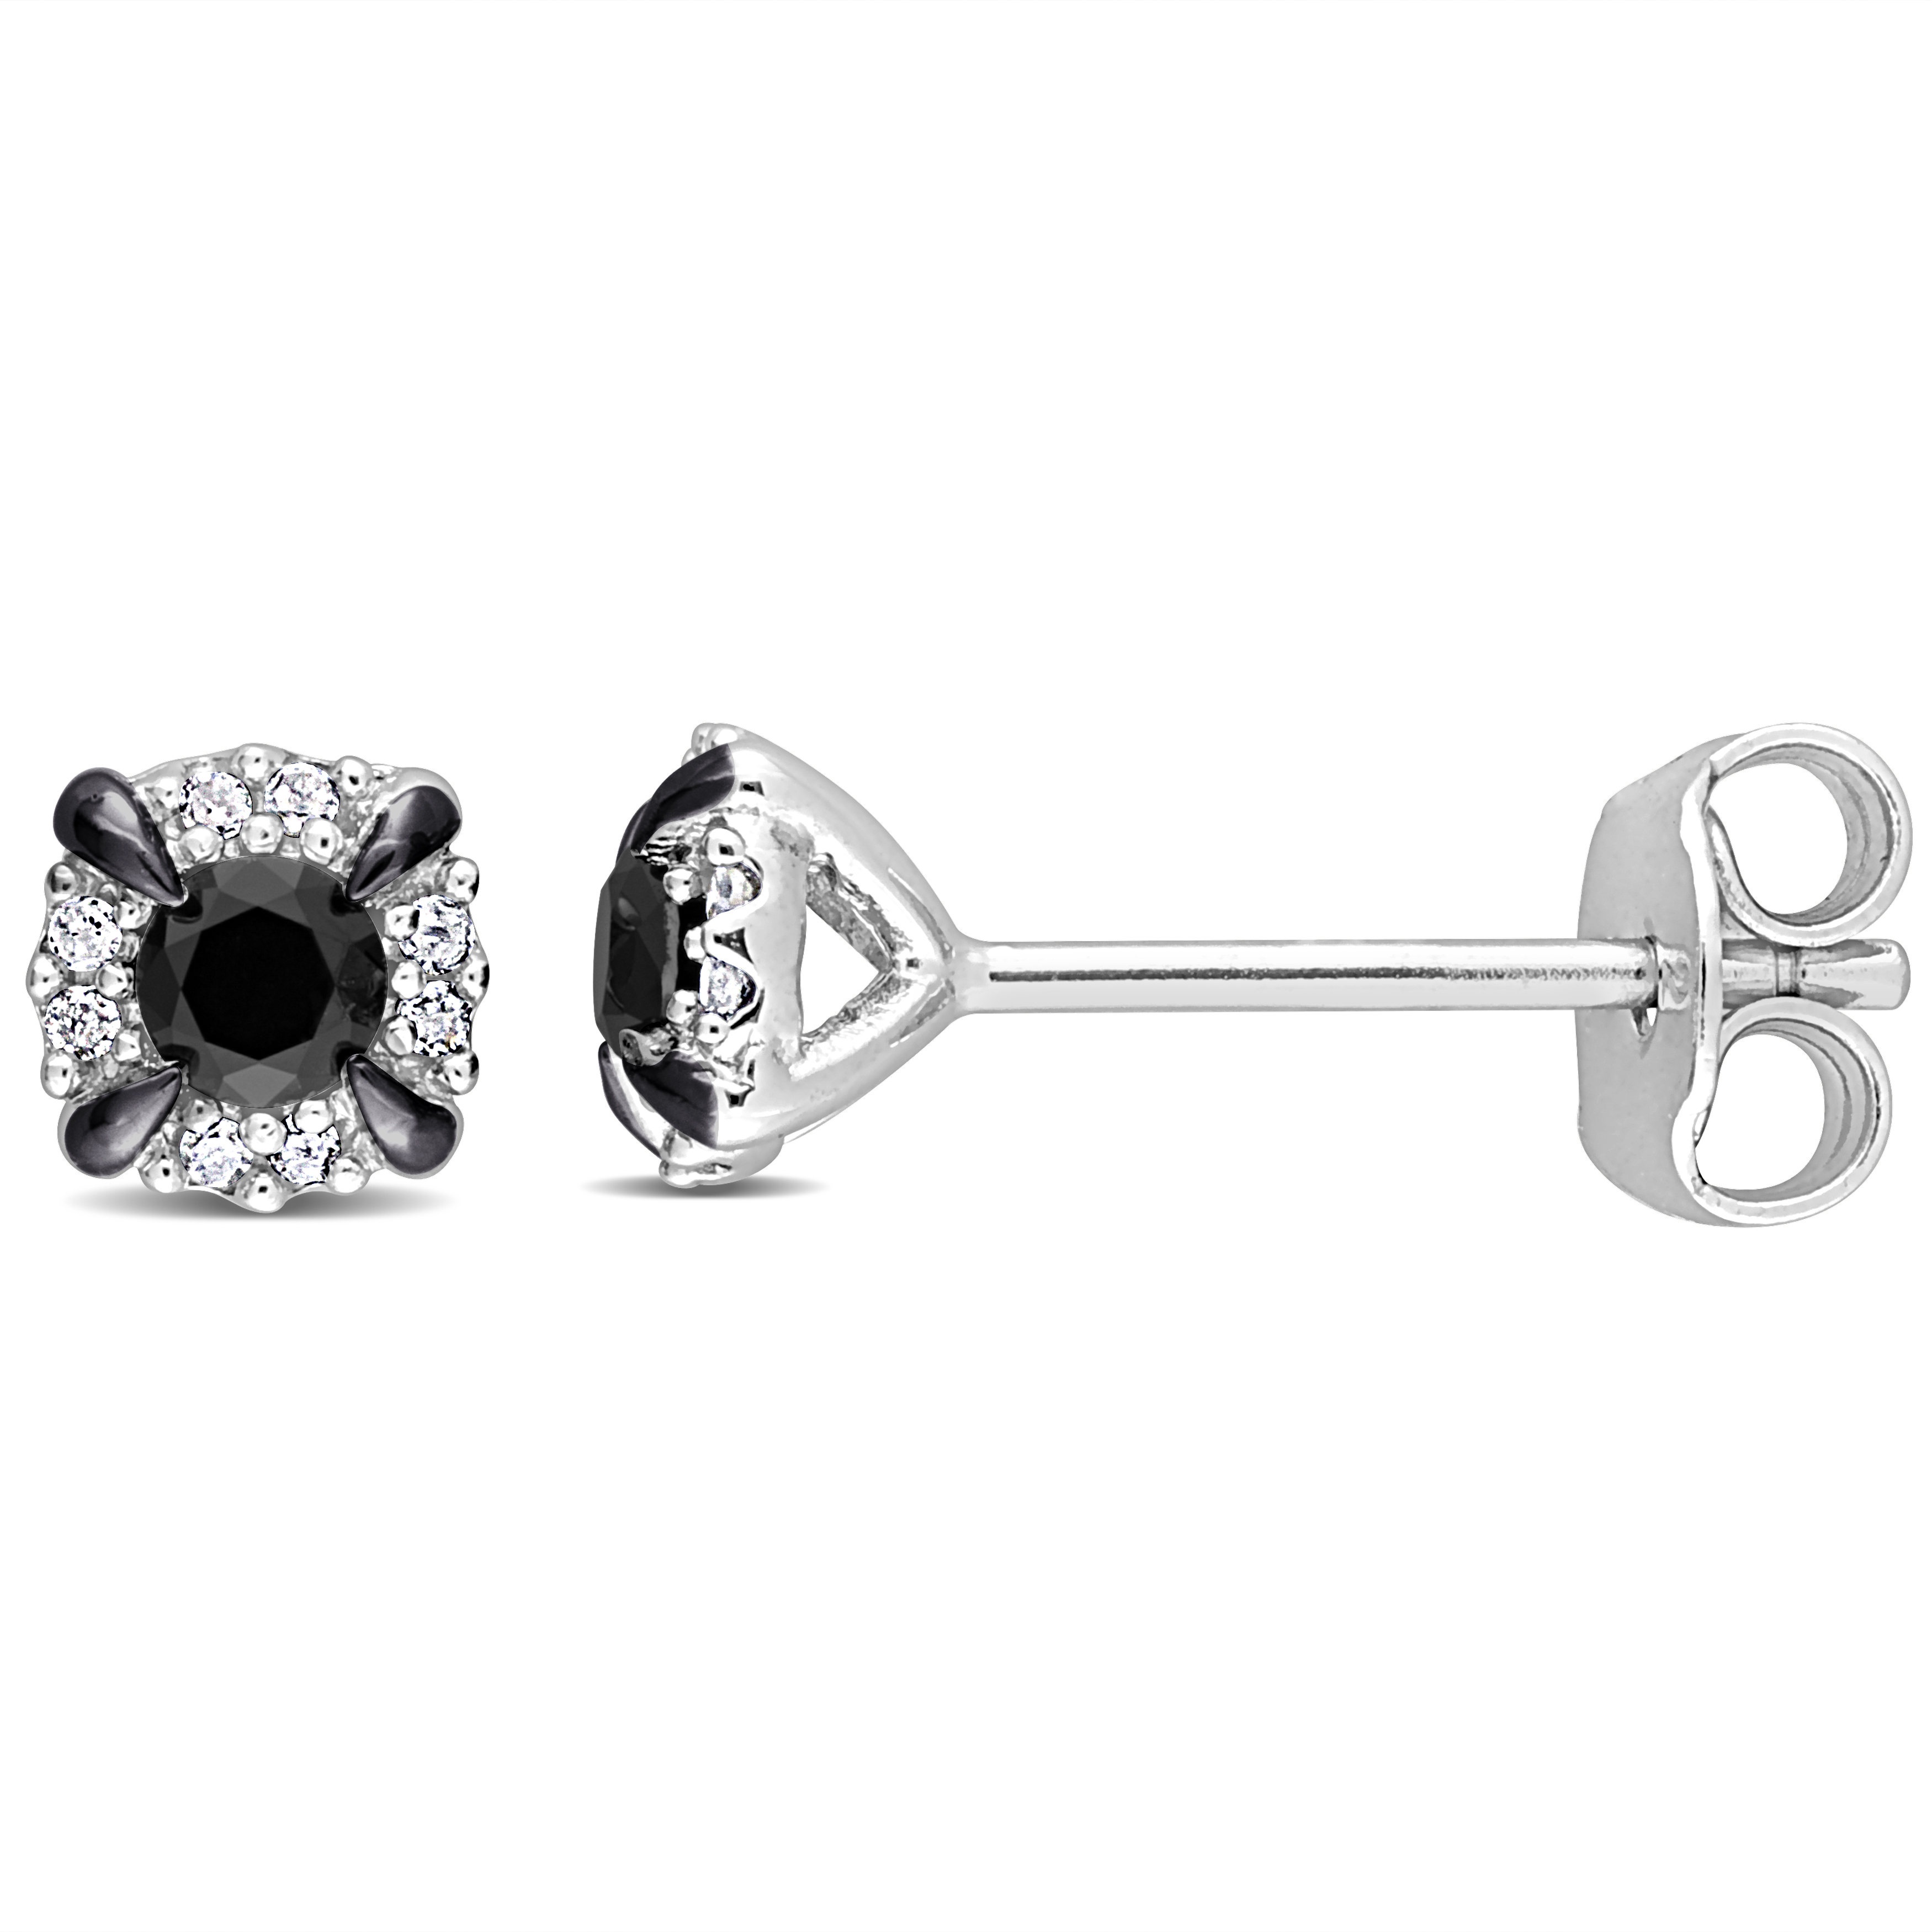 1/4 CT TW Black and White Diamond Earrings in Sterling Sivler with Black Rhodium